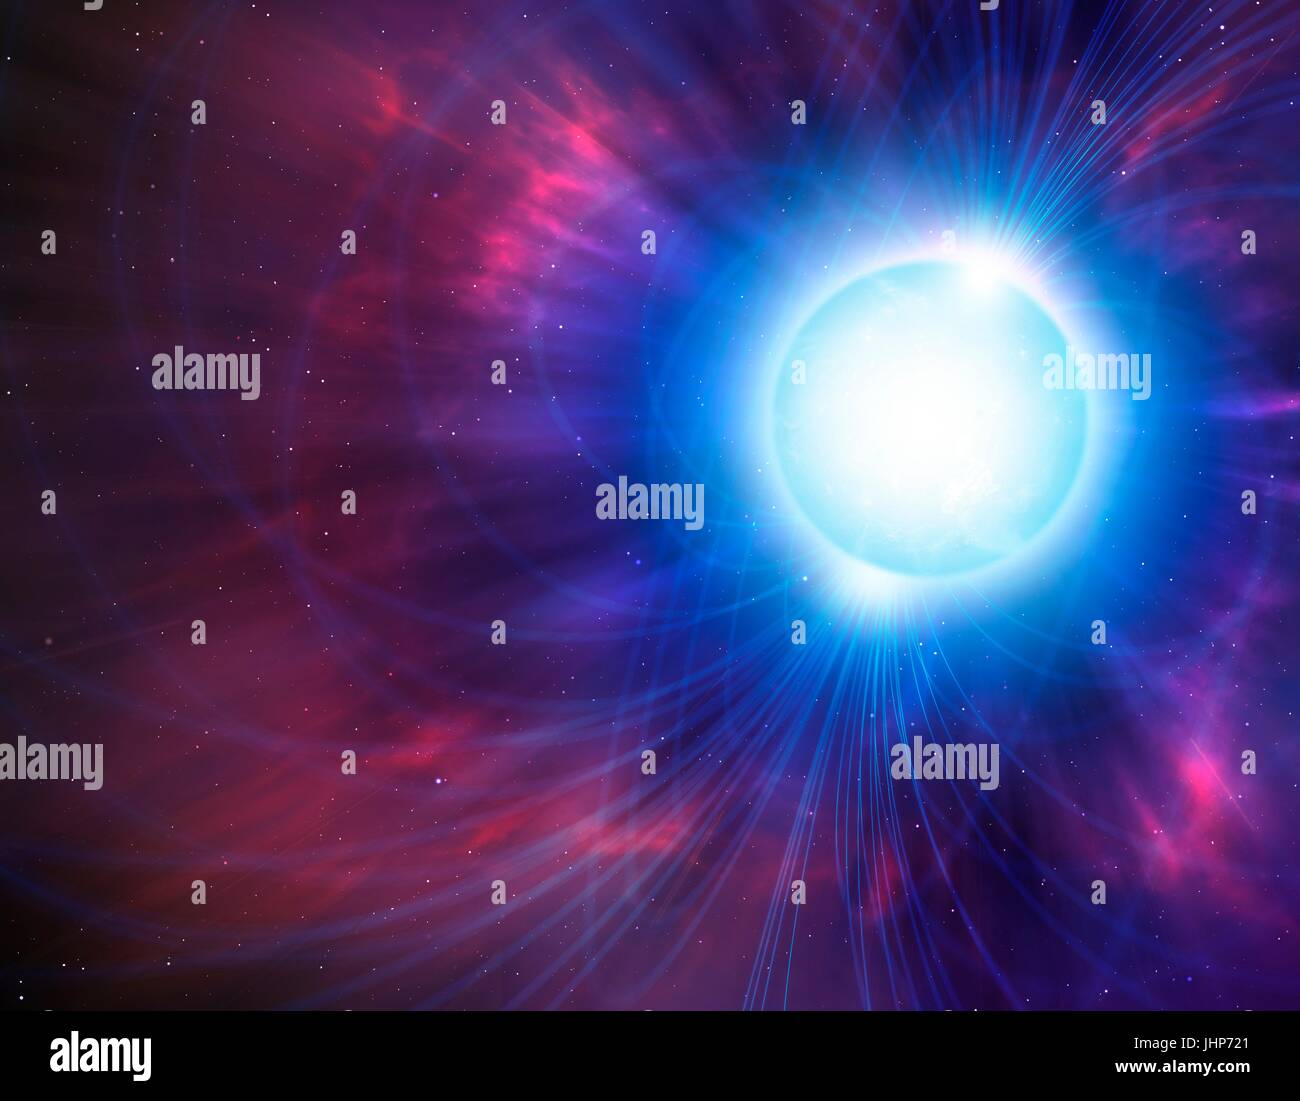 Computer artwork showing the magnetic field (lines) around a magnetar. A magnetar is a type of neutron star with an incredibly strong magnetic field (a million billion times stronger than that of the Earth), which is formed when certain stars undergo supernova explosions. Stock Photo